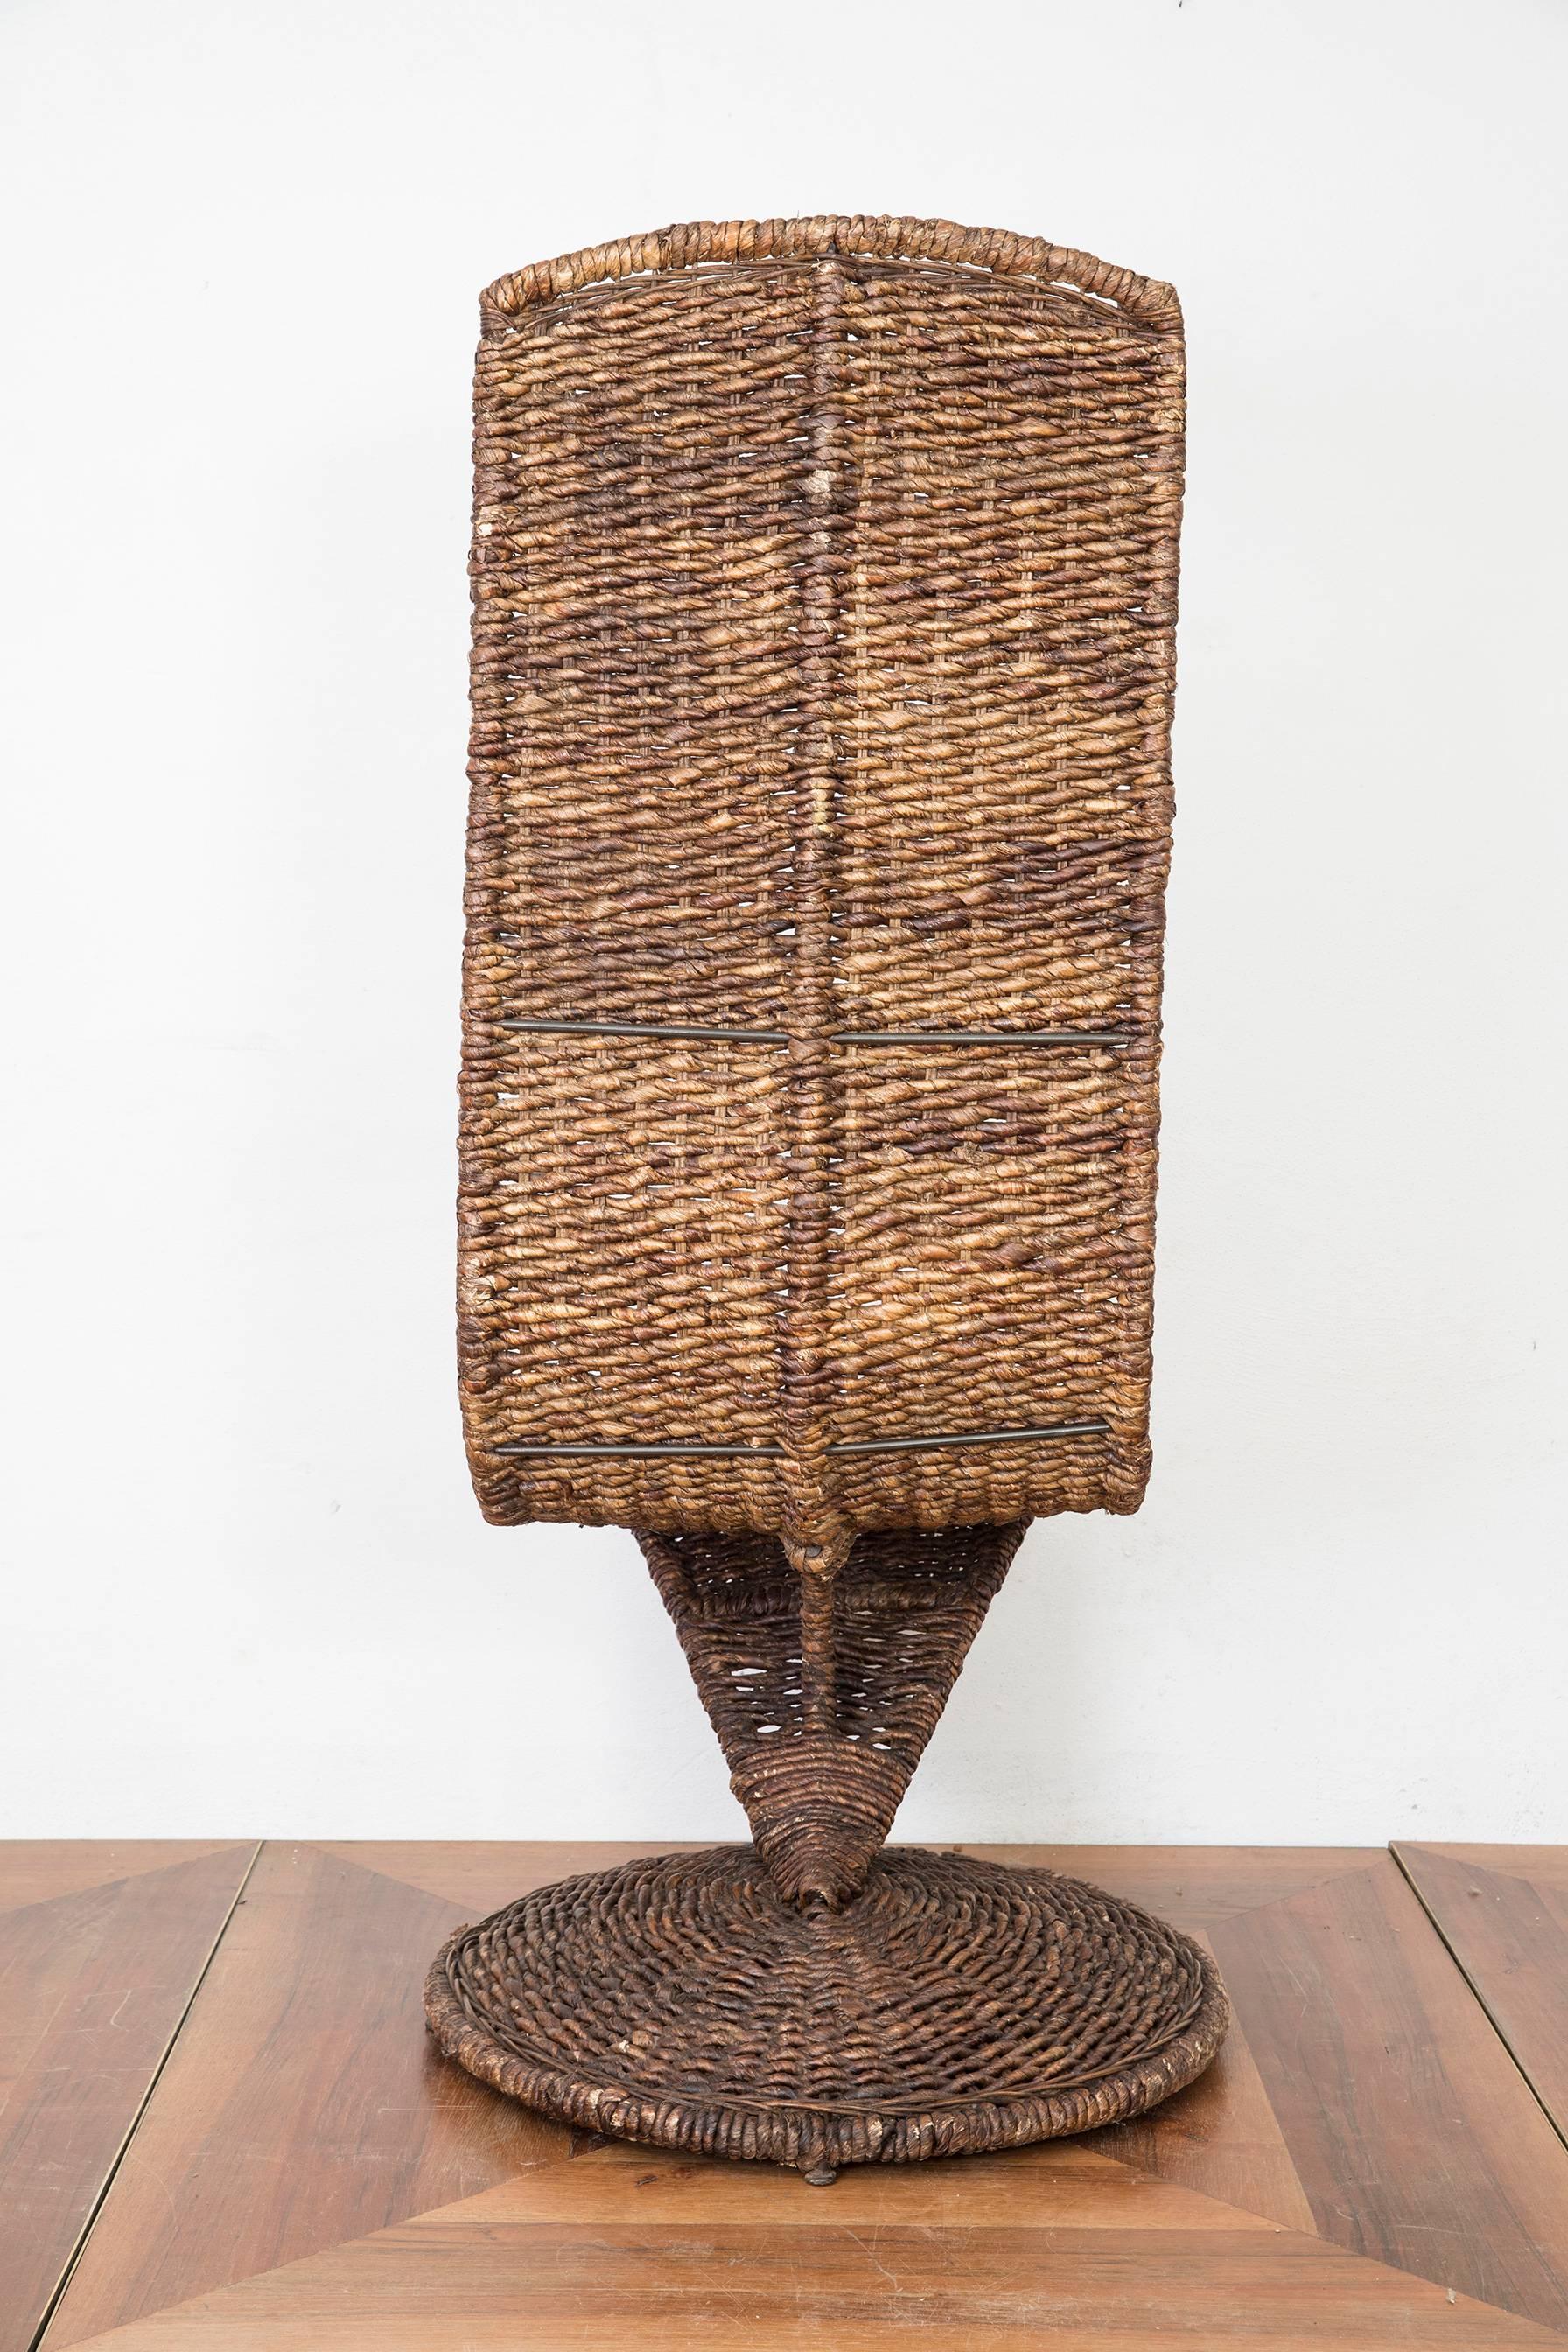 Mid-Century Modern Woven Wicker Banana Leaf S Chair by Marzio Cecchi, 1970s For Sale